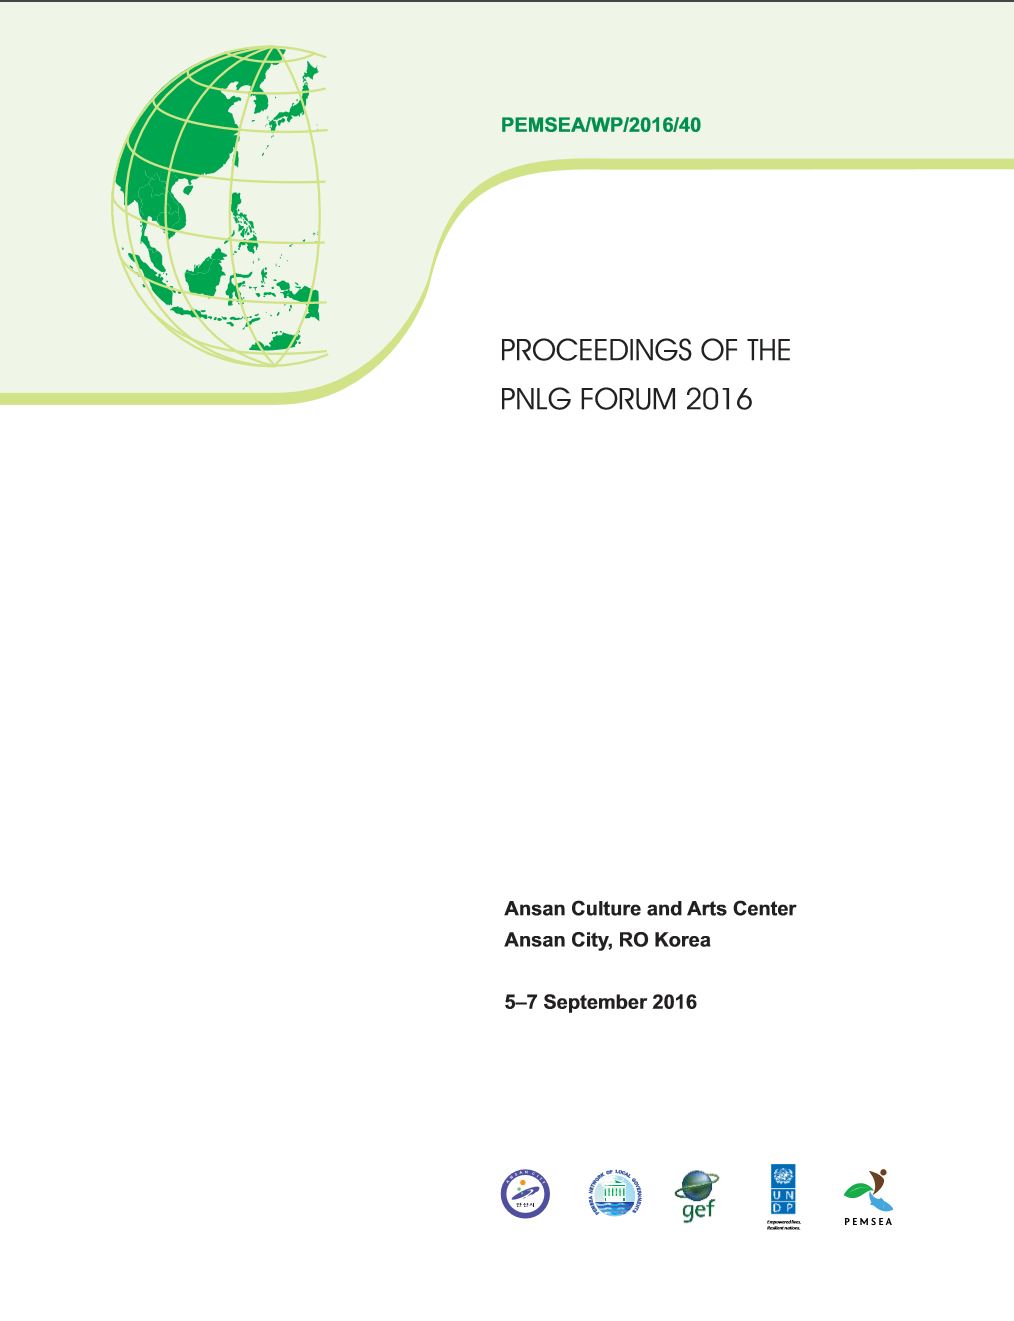 Proceedings of the PNLG Forum 2016